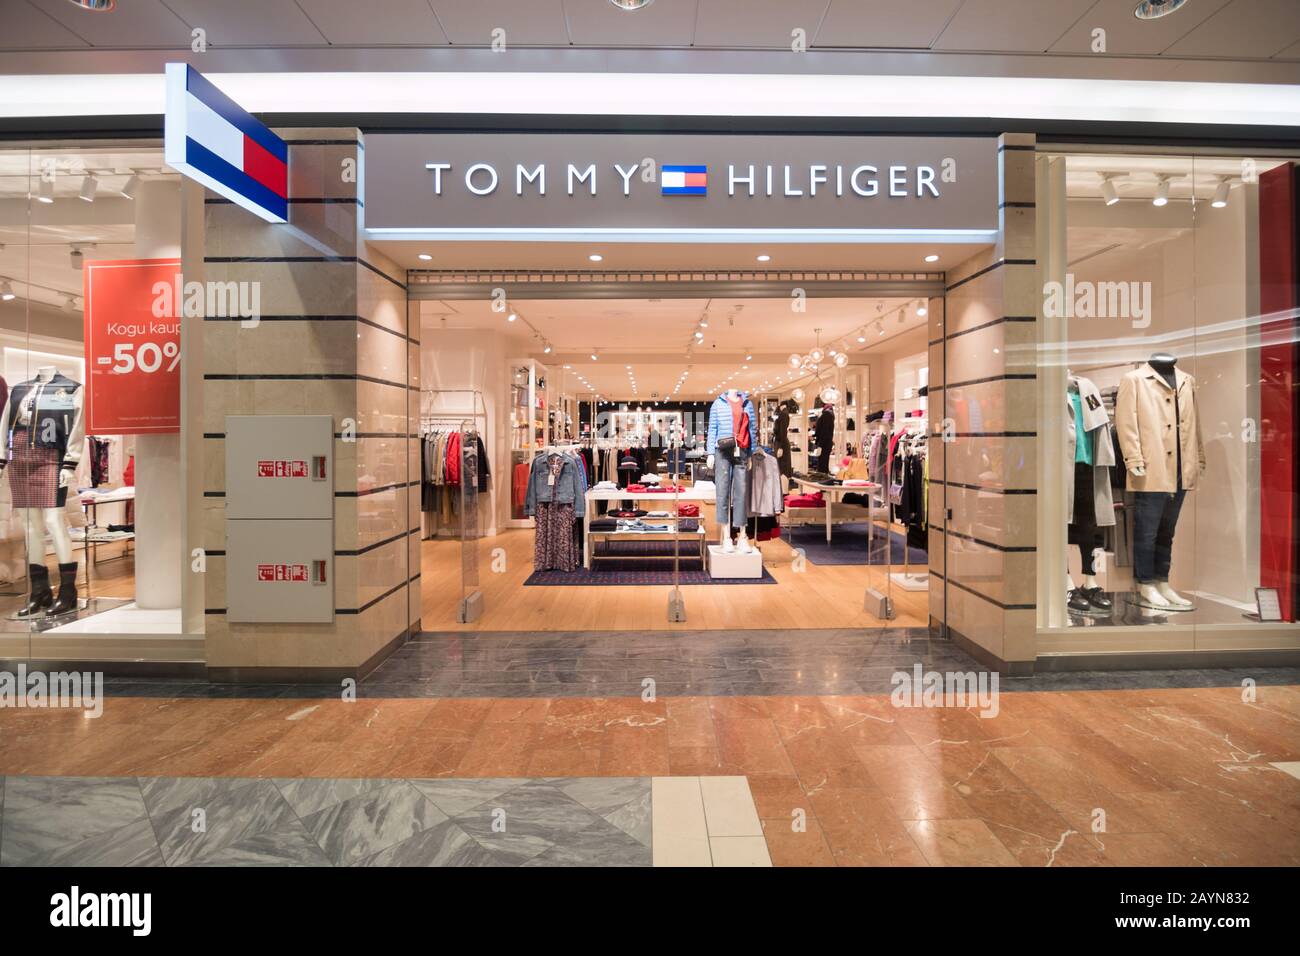 constantemente campo Contento Tommy Hilfiger Store Display High Resolution Stock Photography and Images -  Alamy